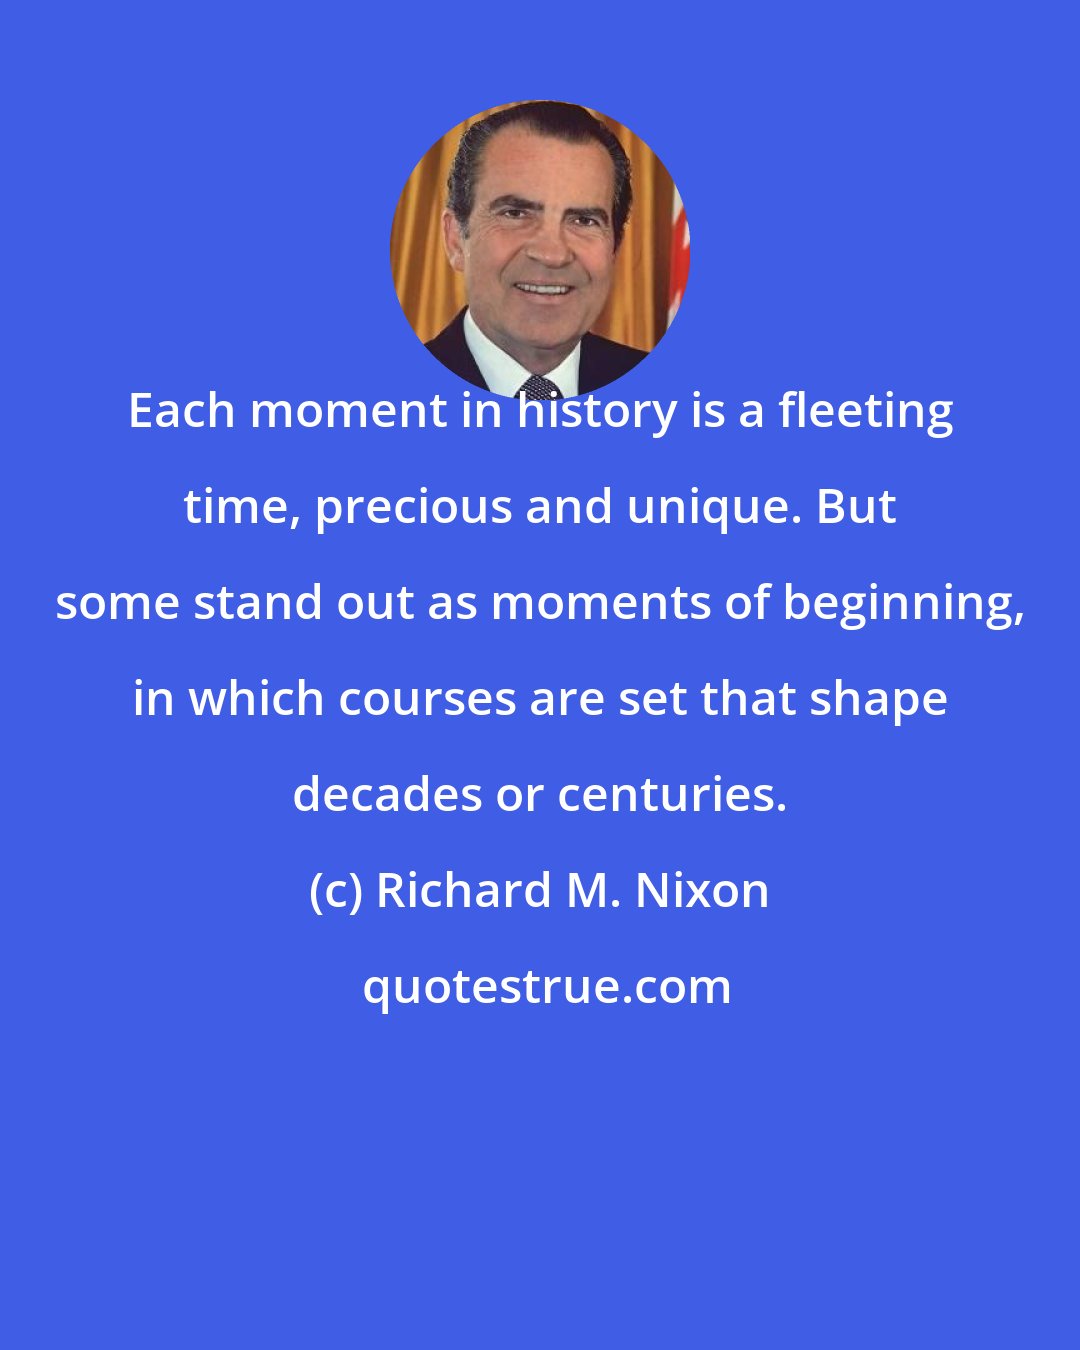 Richard M. Nixon: Each moment in history is a fleeting time, precious and unique. But some stand out as moments of beginning, in which courses are set that shape decades or centuries.